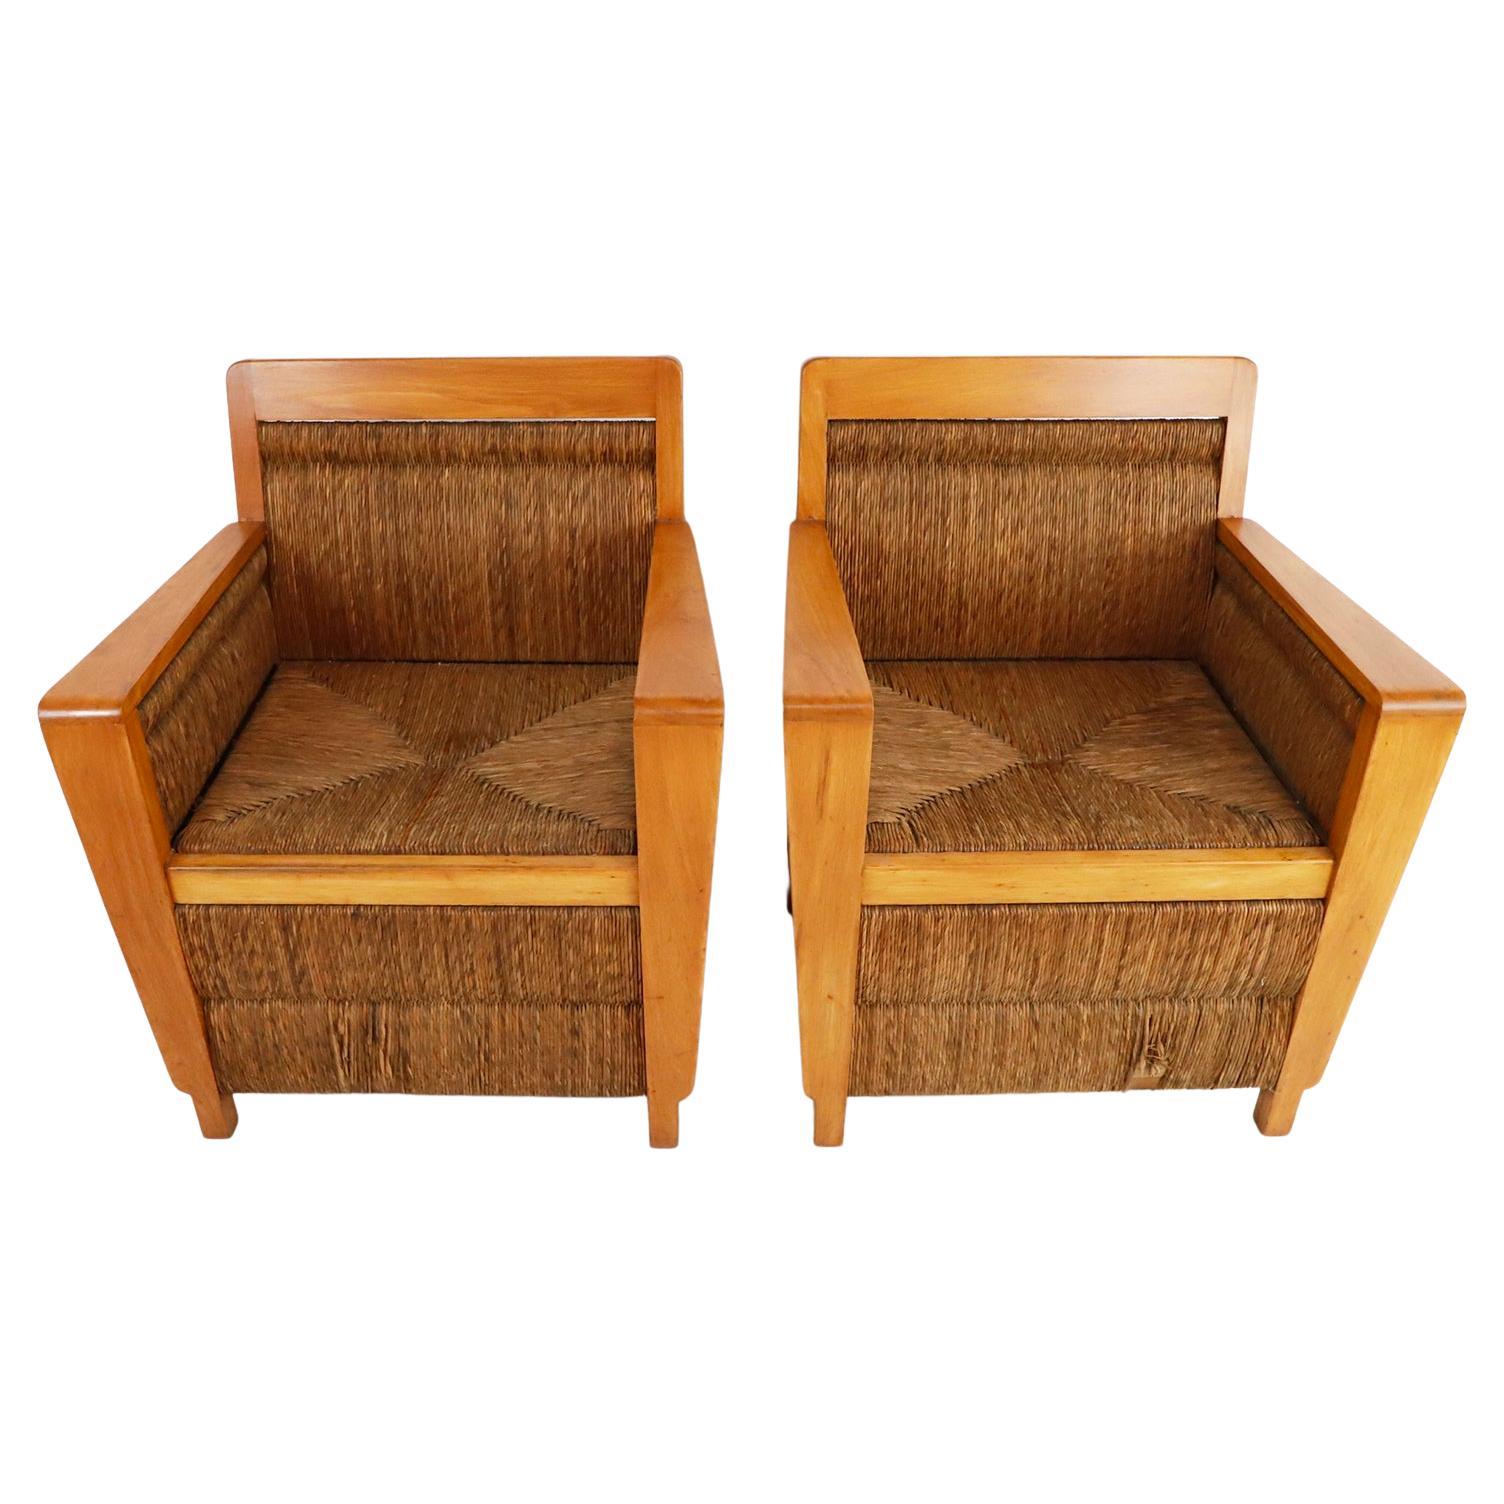 Pair of Mexican Mid-Century Modern Woven Armchairs For Sale